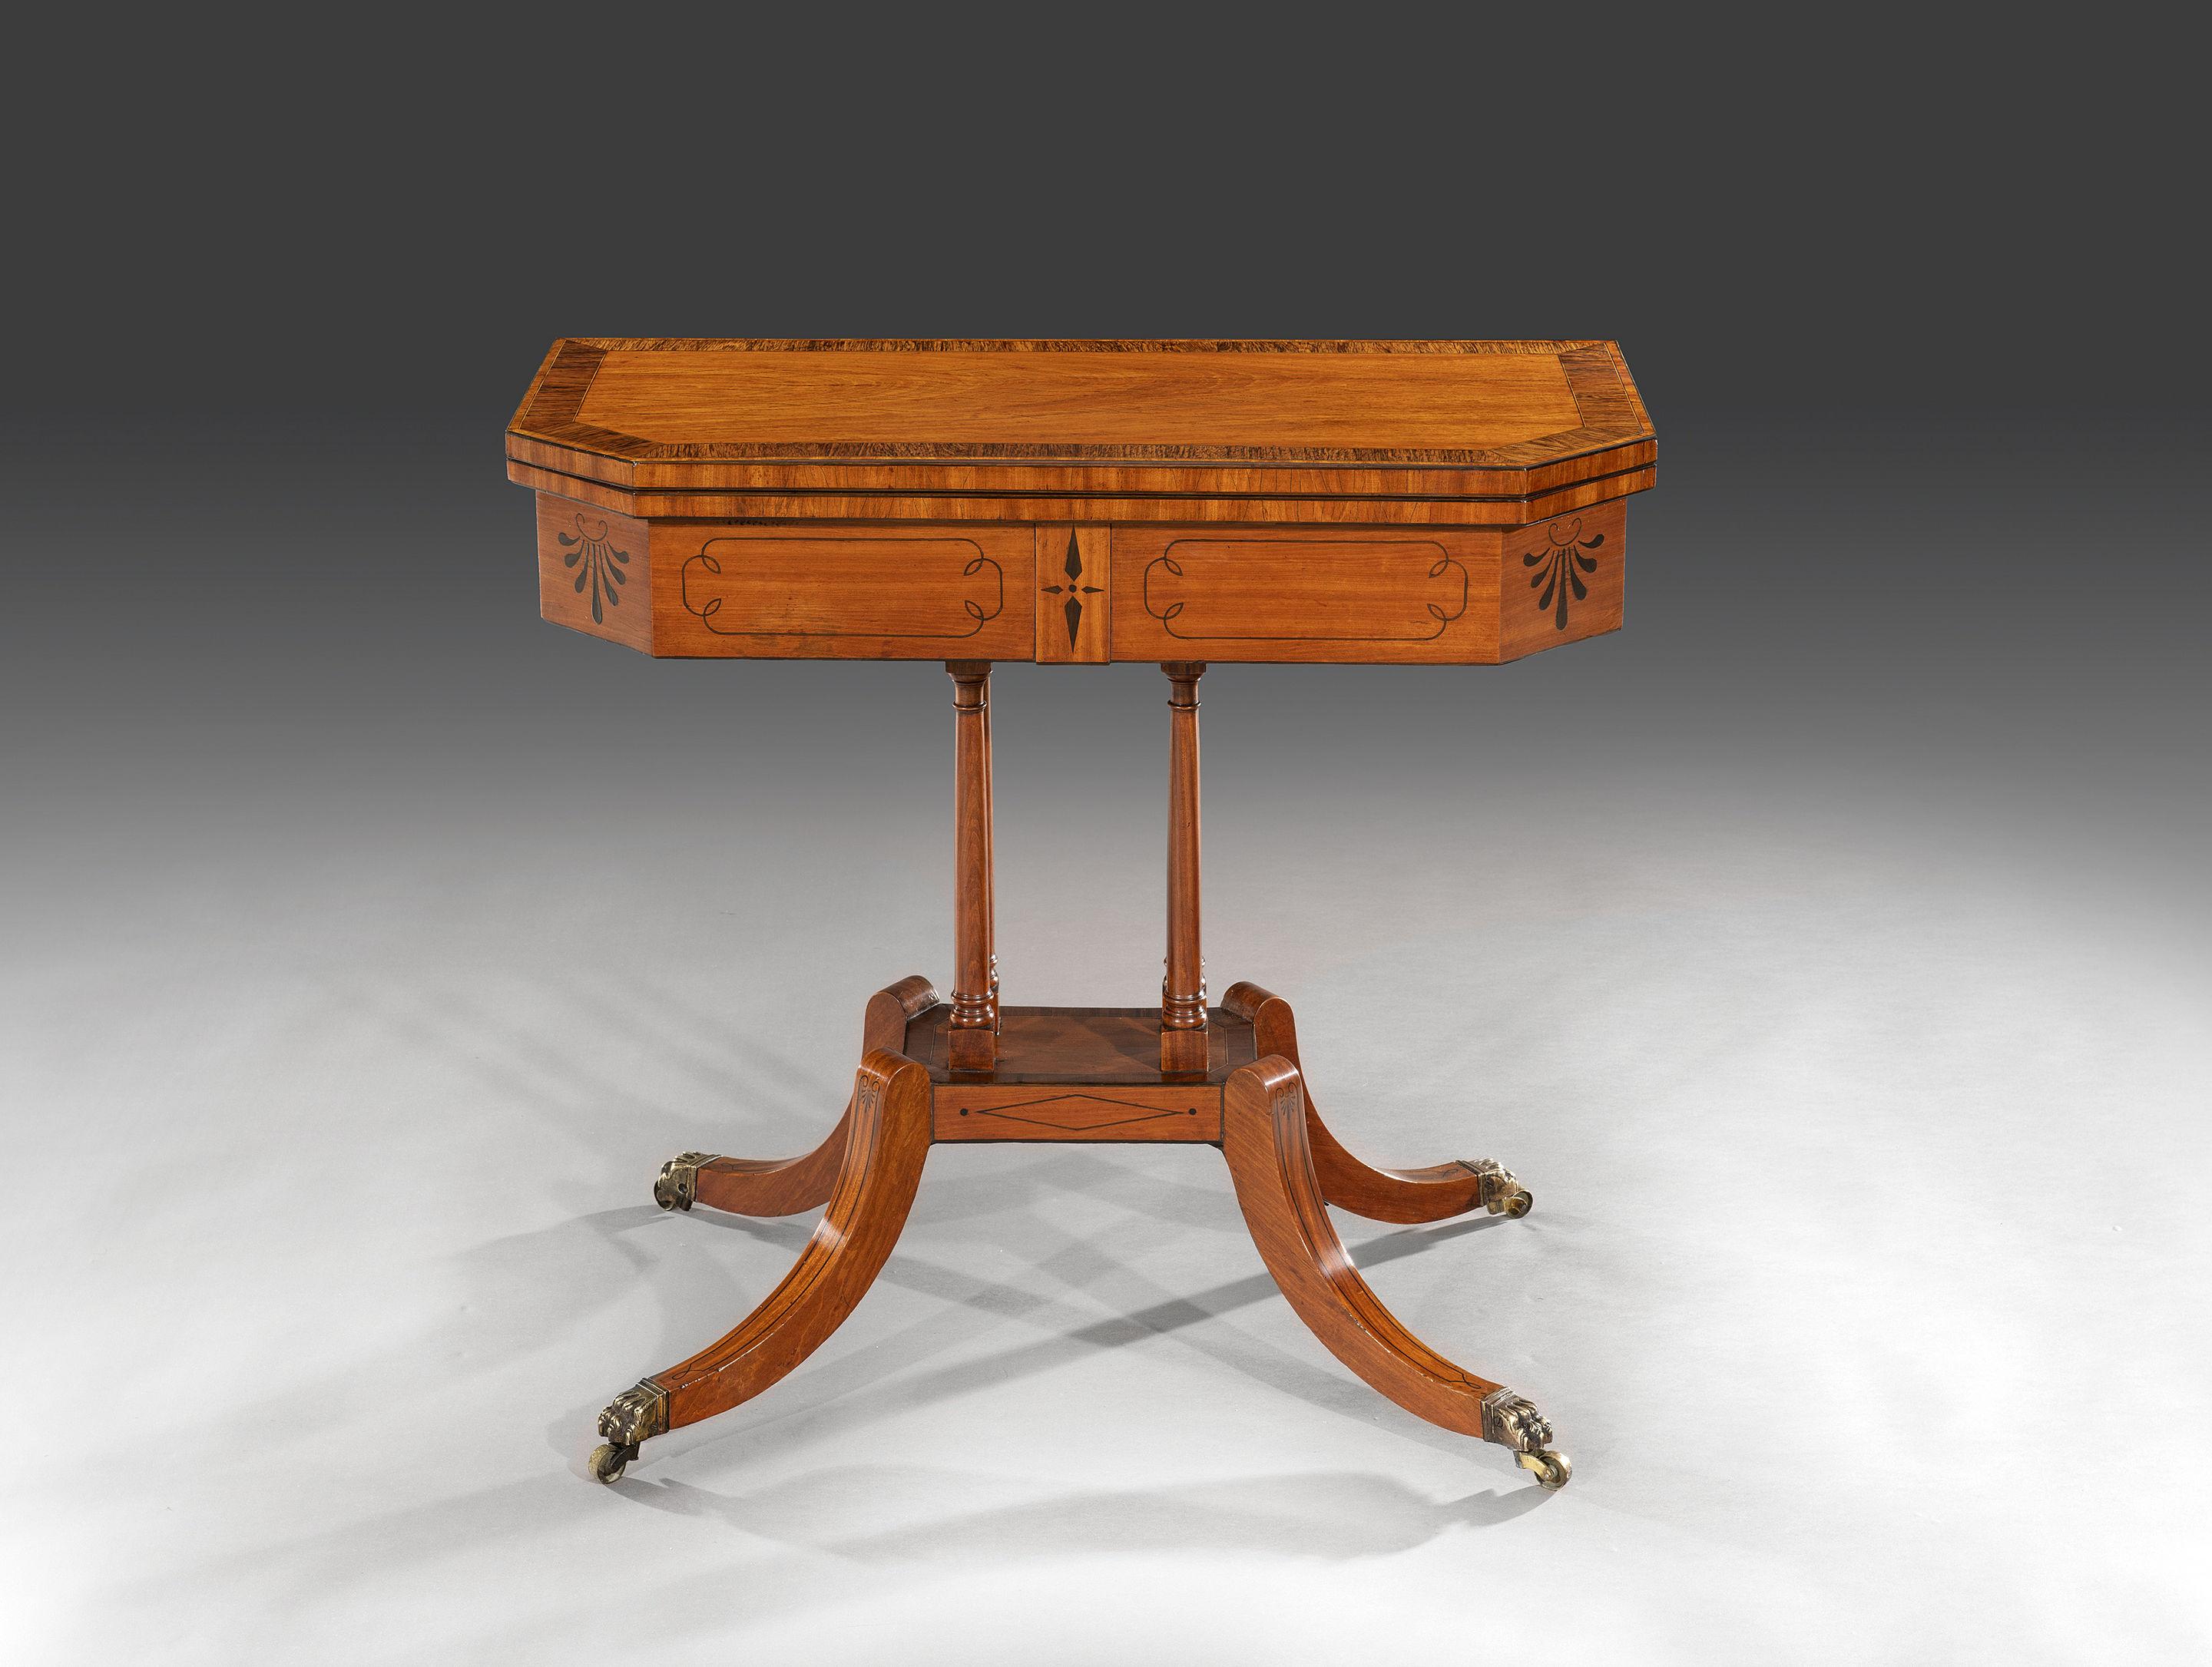 The rectangular top with canted corners is highly figured in West Indian satinwood and cross banded in rosewood and strung with boxwood and ebony. The top opens and swivels round to lay flat to reveal a green baize playing surface above a deep